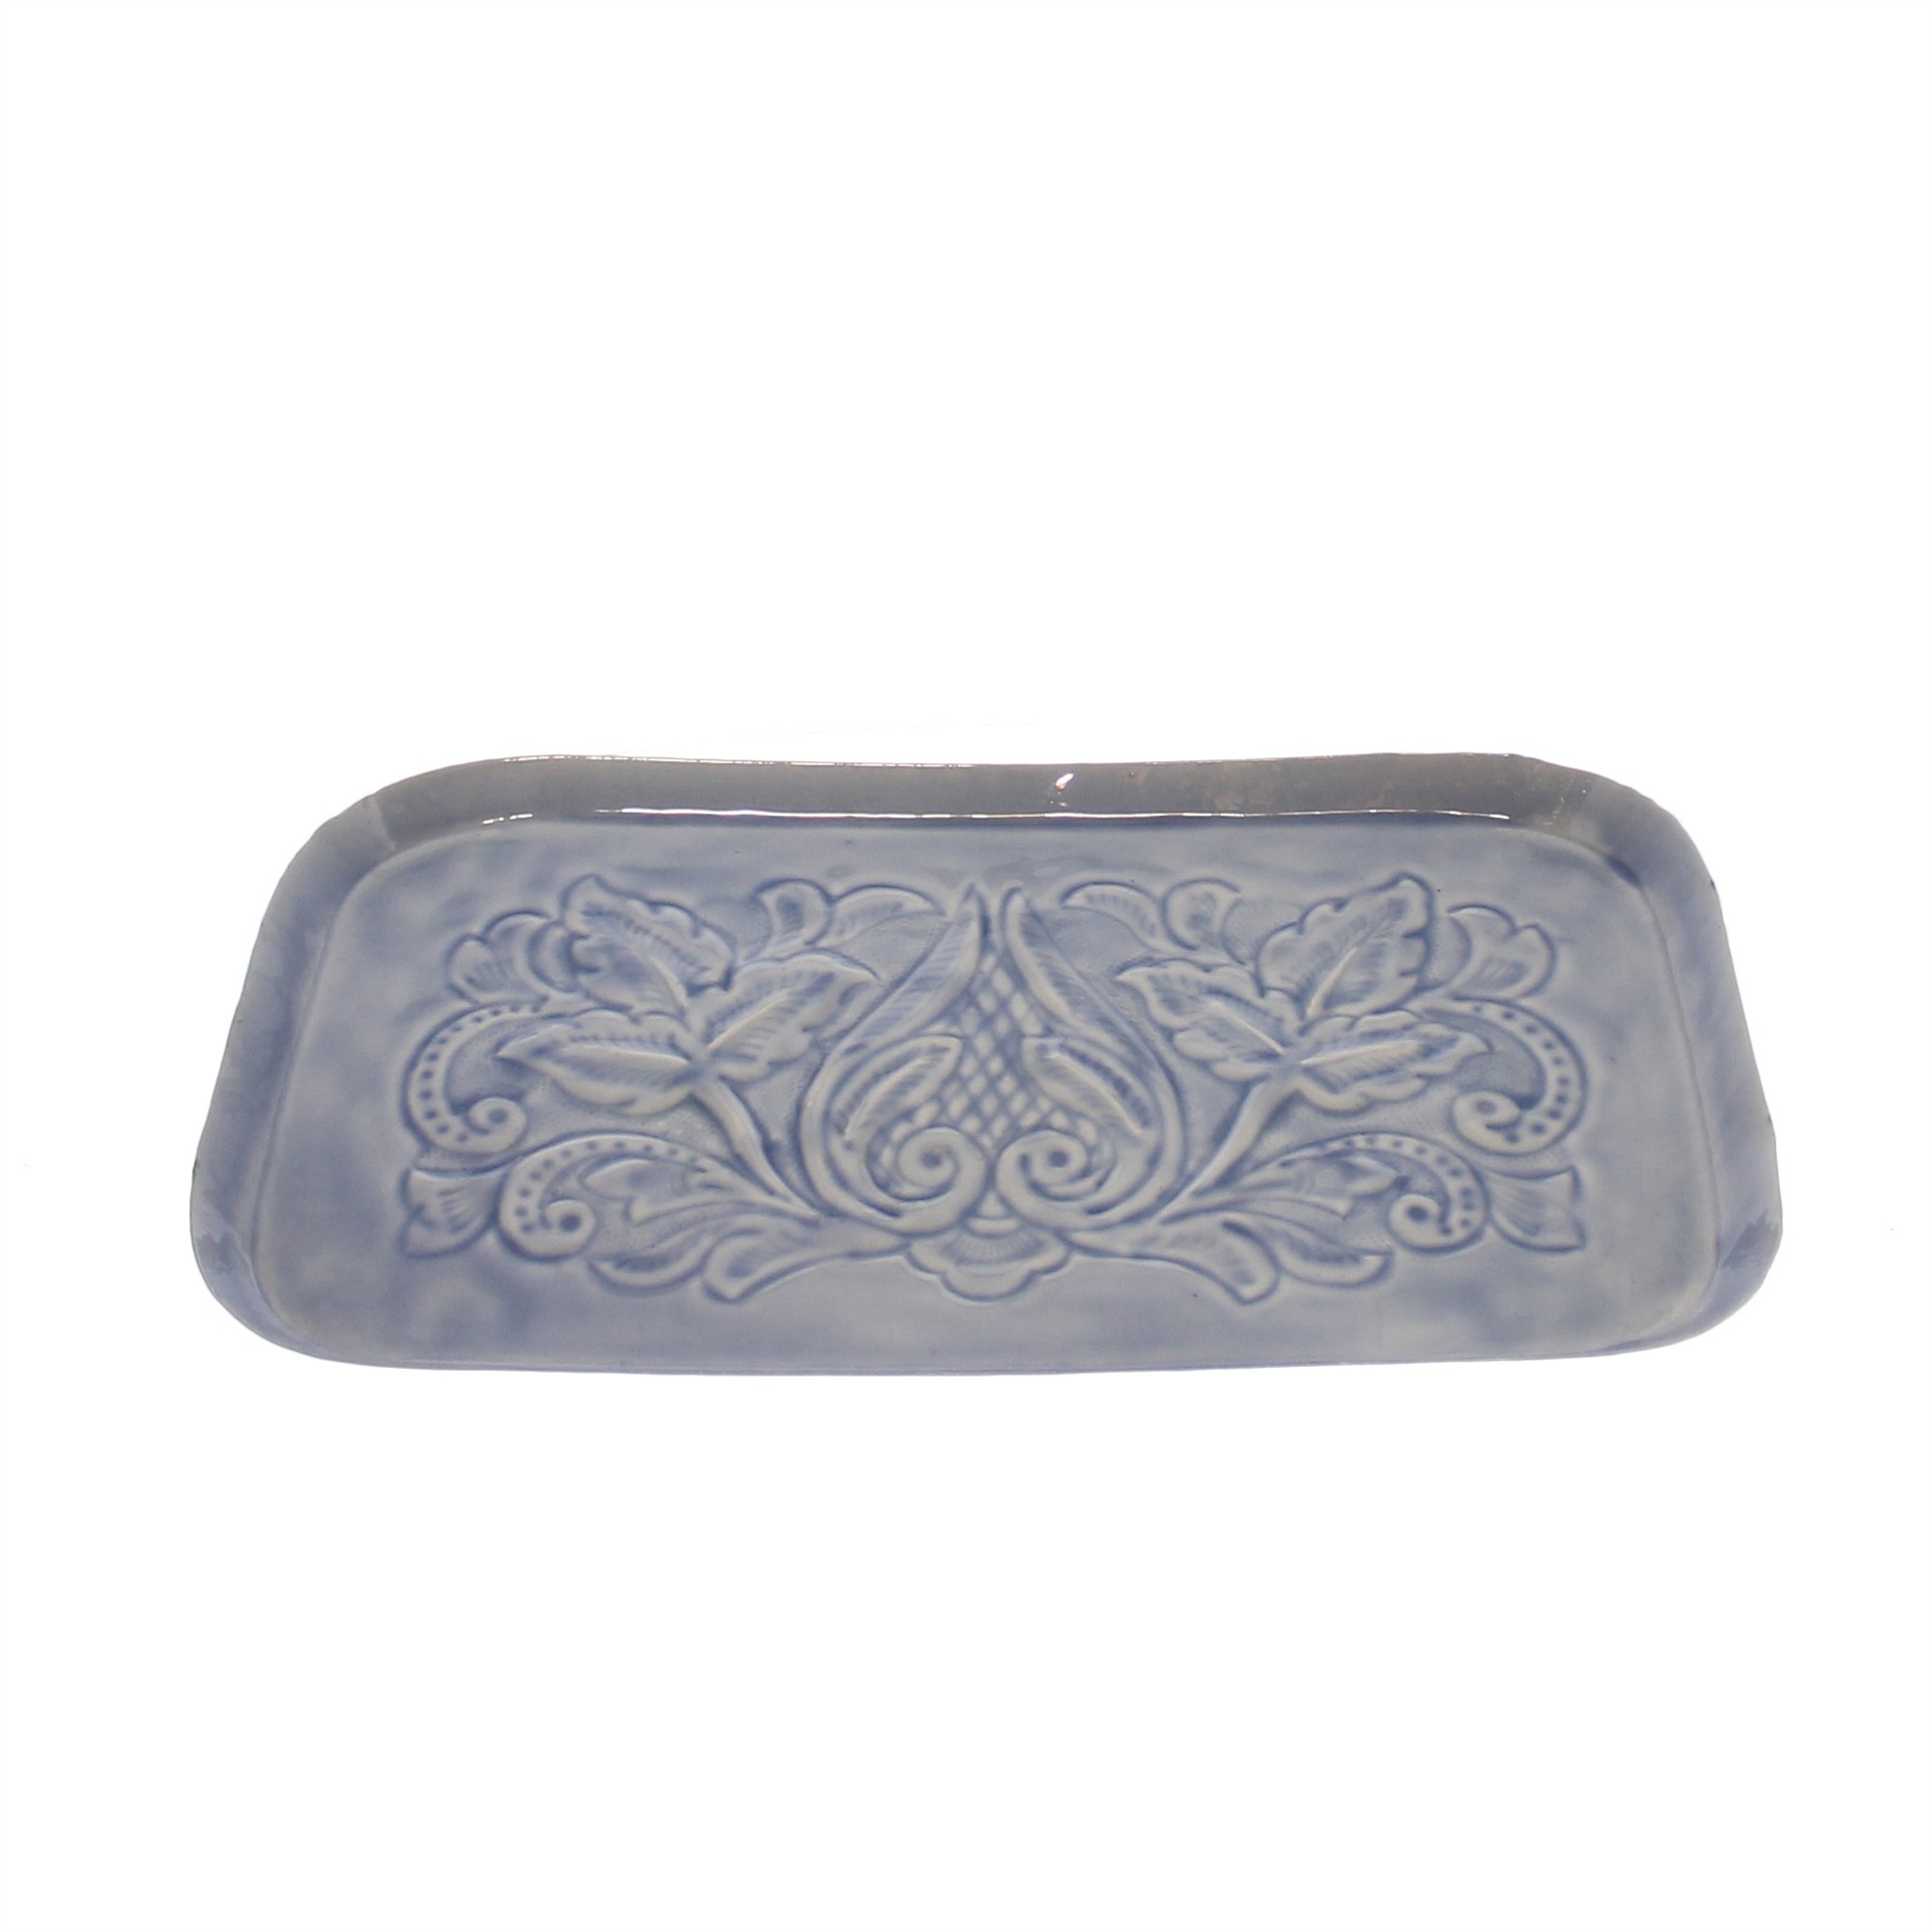 Petite Blue Floral Embossed Tray